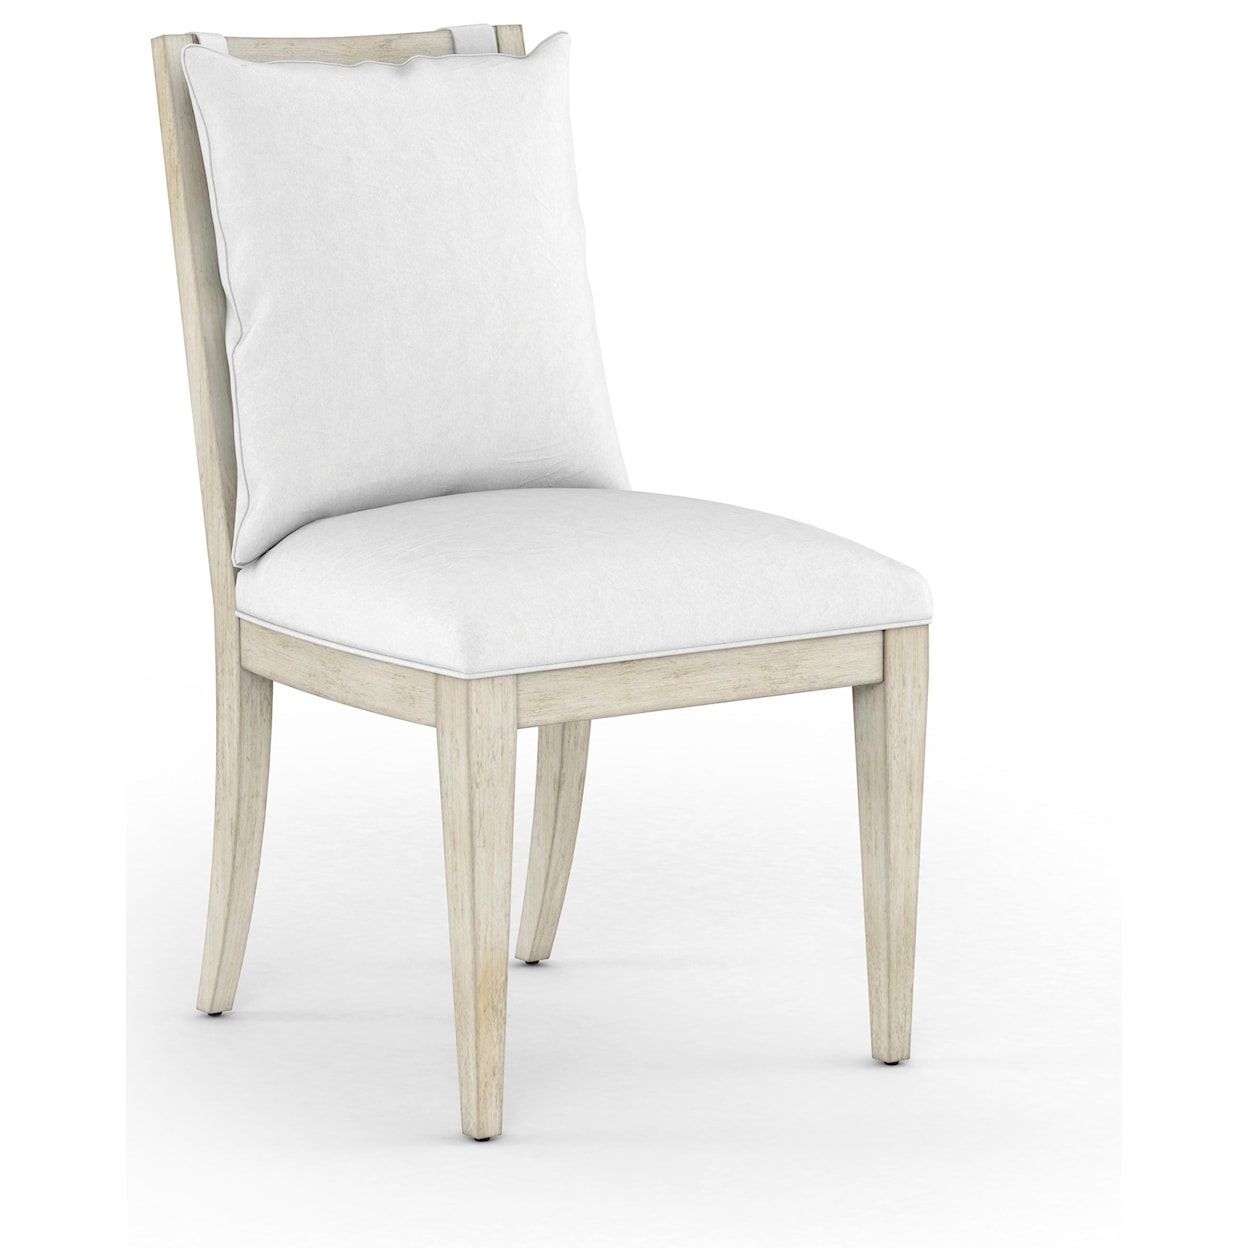 A.R.T. Furniture Inc Cotiere Upholstered Side Chair